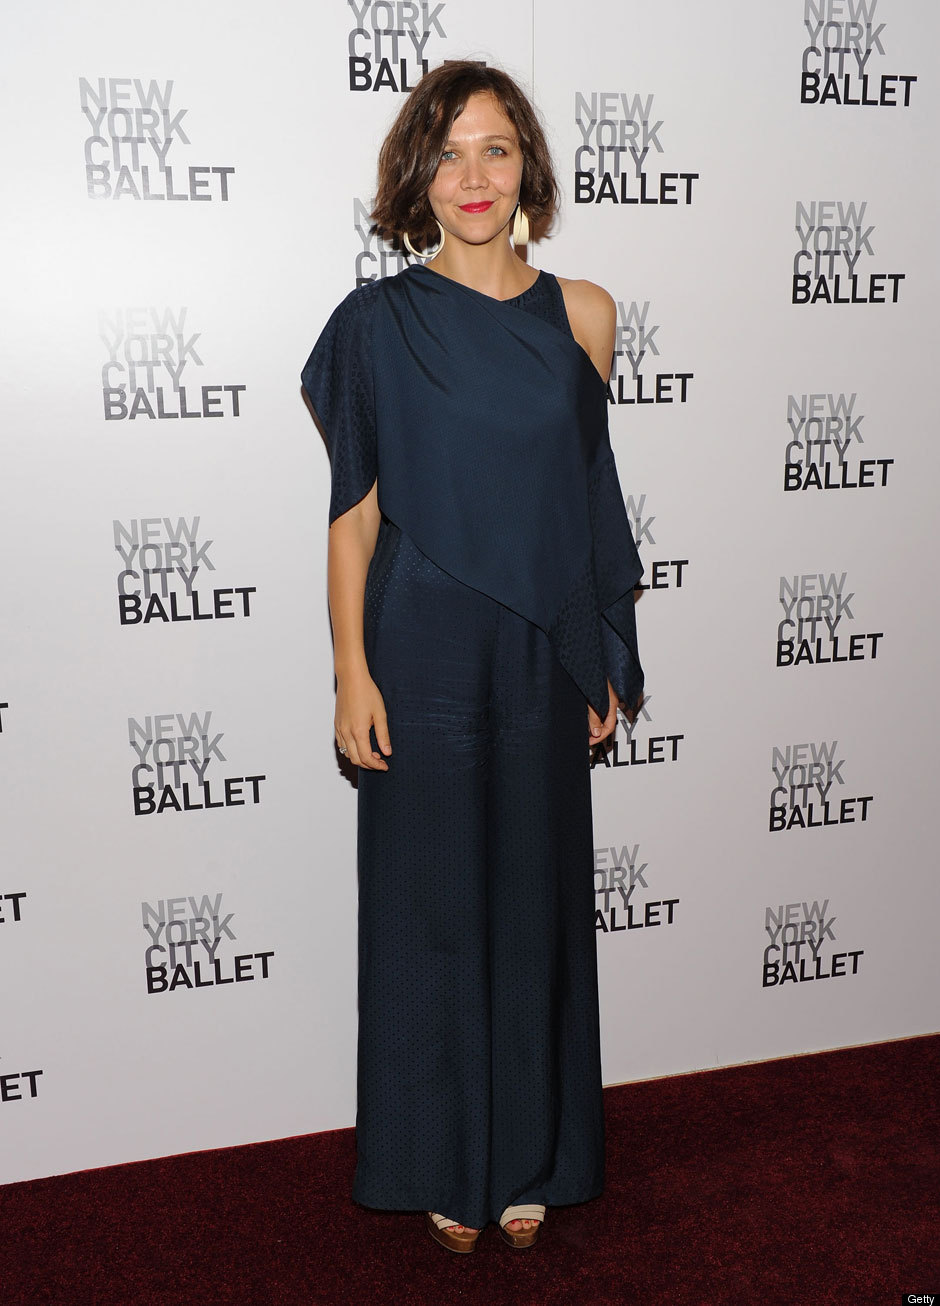 maggie gyllenhaal goes long and flowy: hit or miss? (photos, poll)